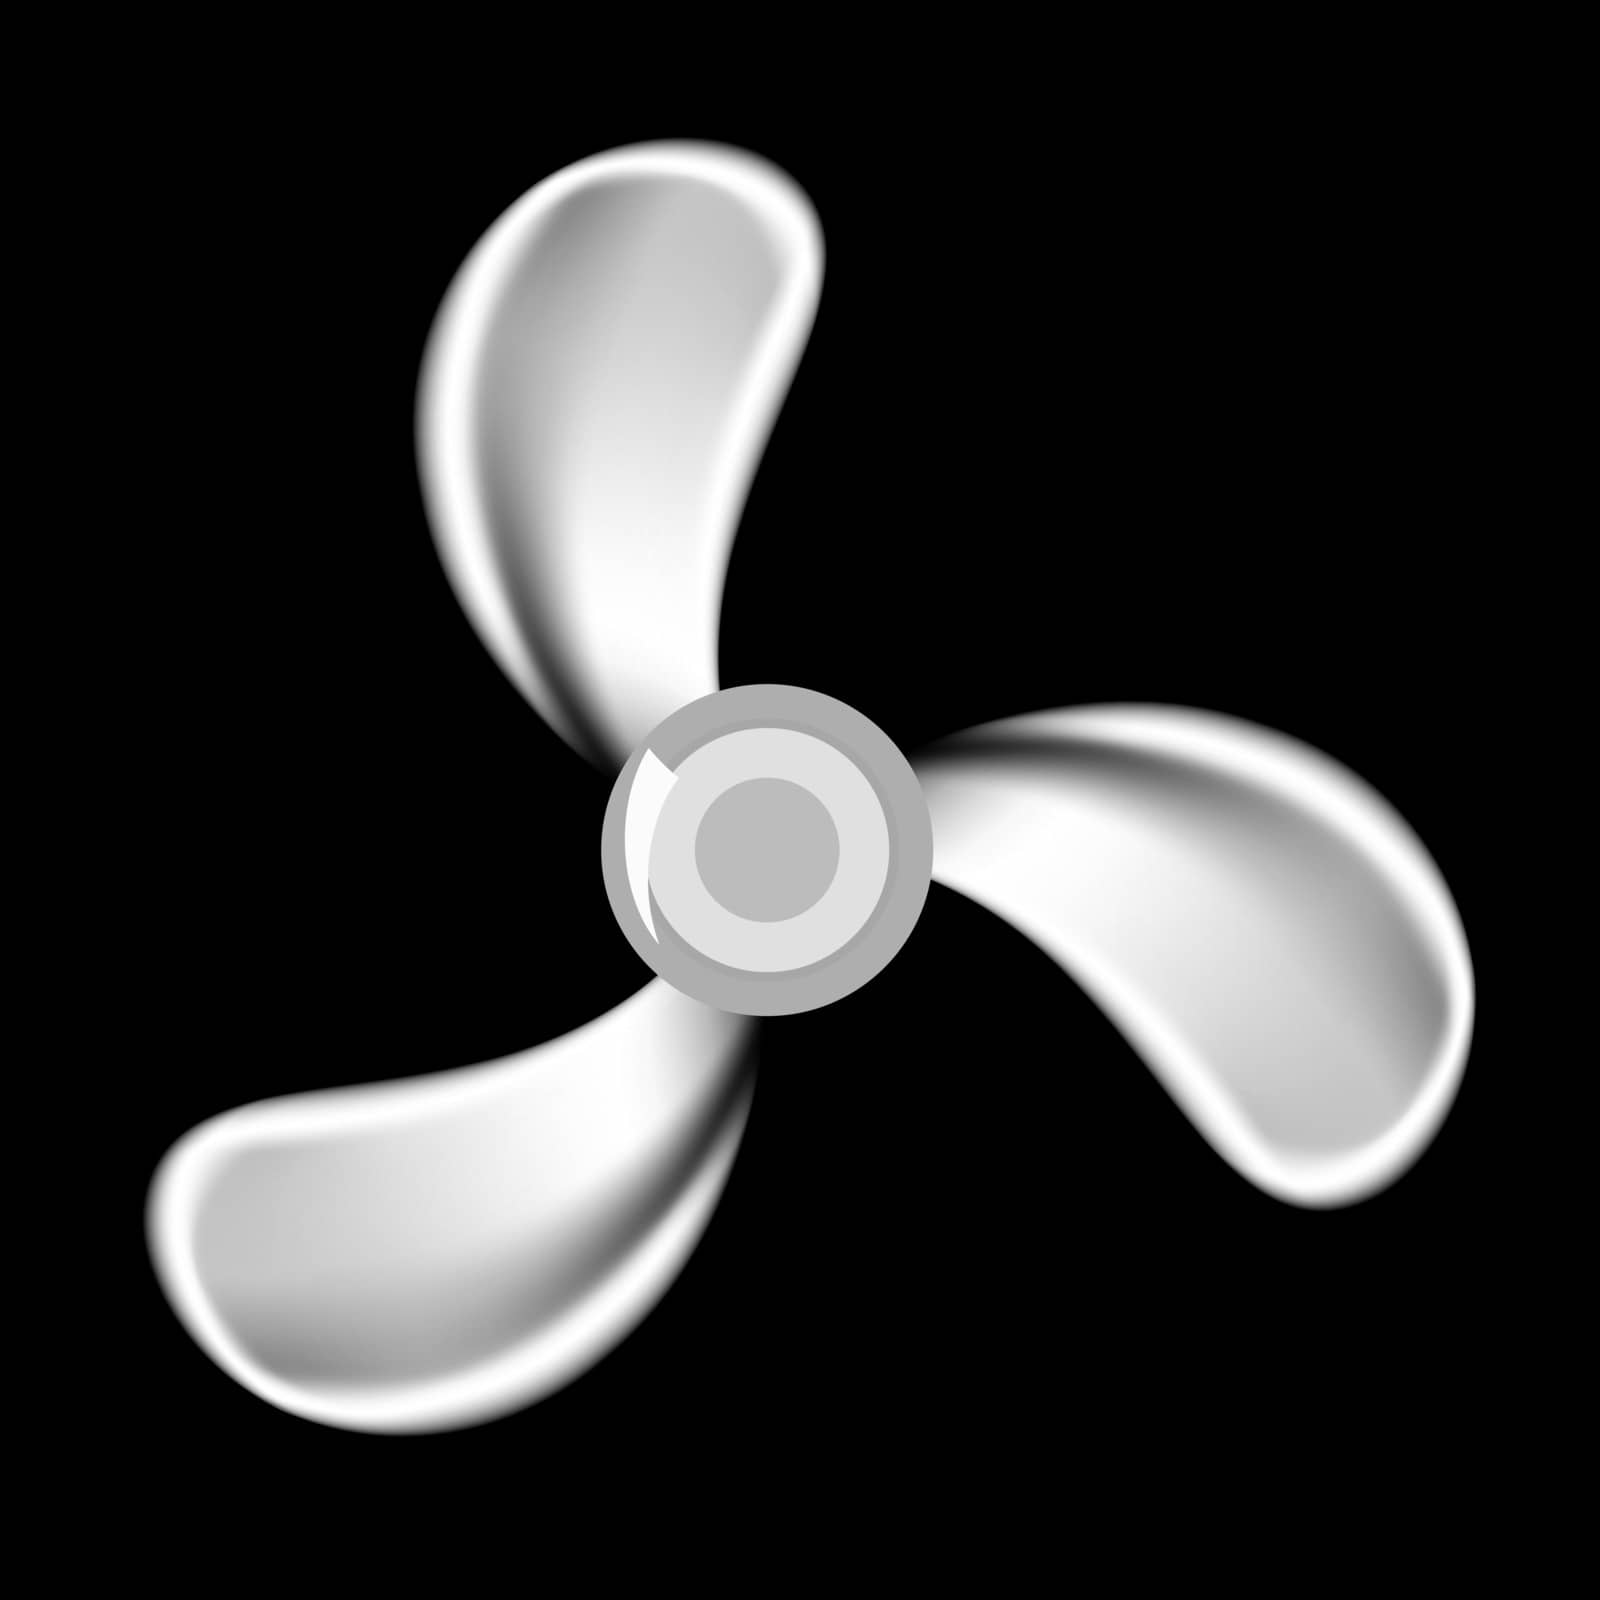 Electric Fan Icon Isolated on Black Background